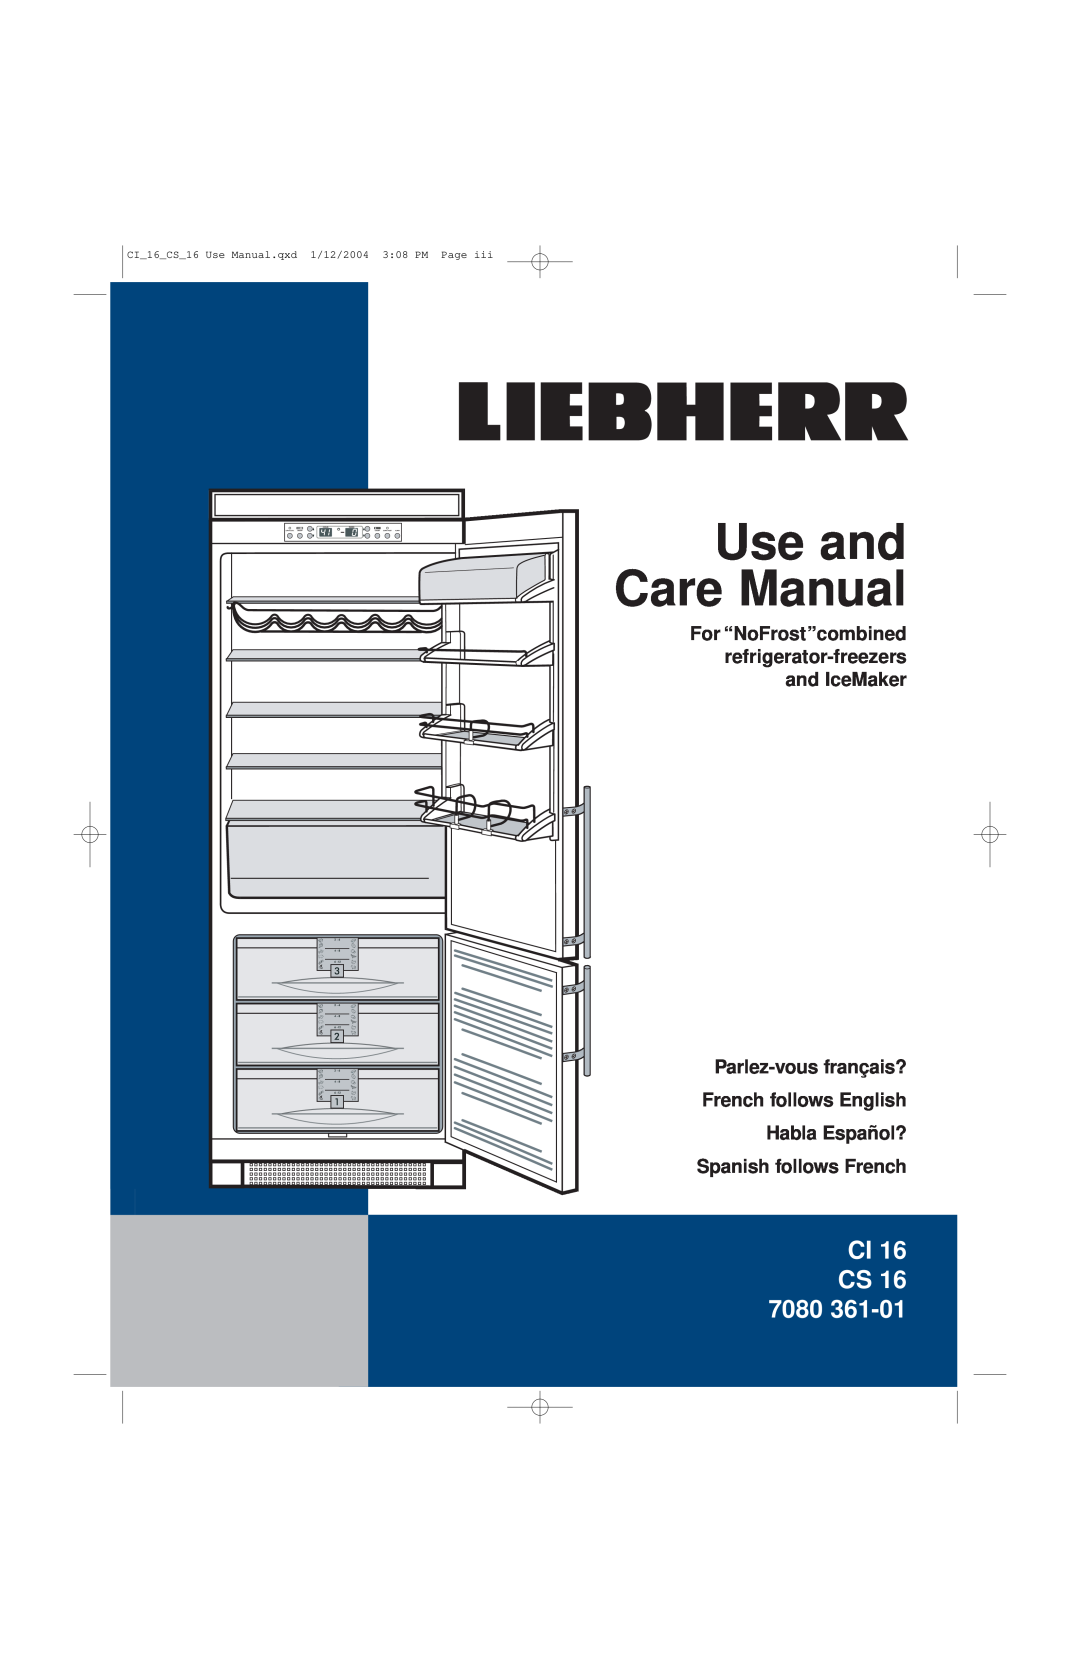 Liebherr CS16 manual For “NoFrost”combined refrigerator-freezers and IceMaker, Spanish follows French, Use and Care Manual 